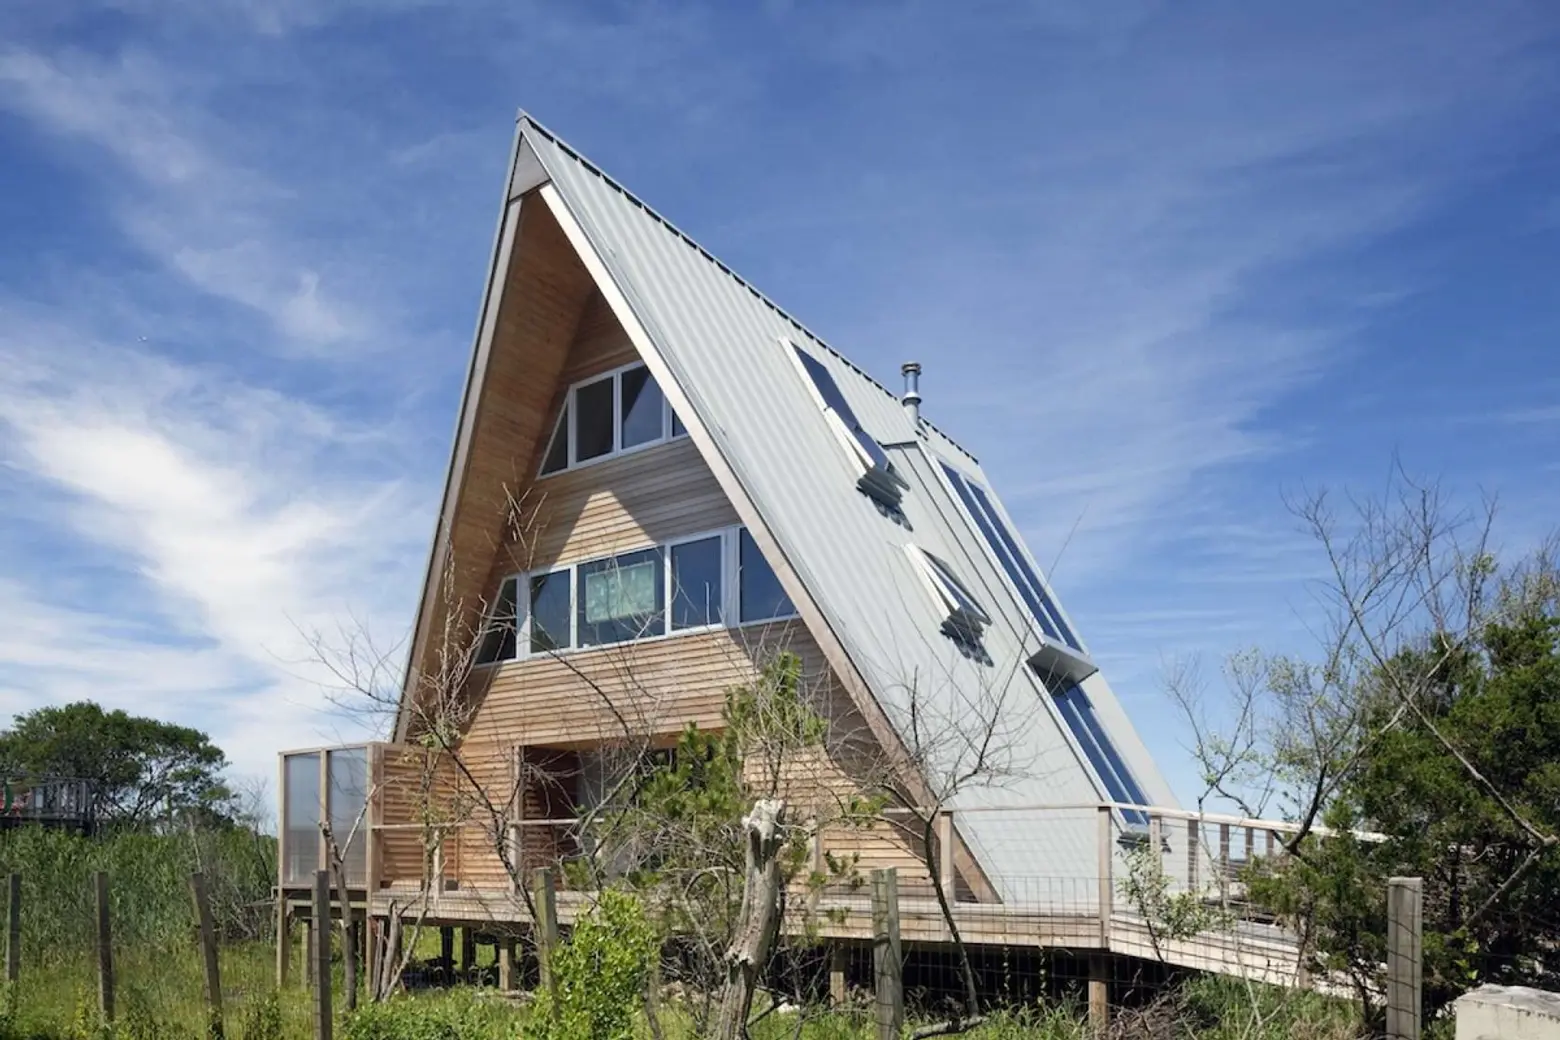 Fire Island’s mid-century modern architecture; a pepper grinder that blocks wi-fi during meals